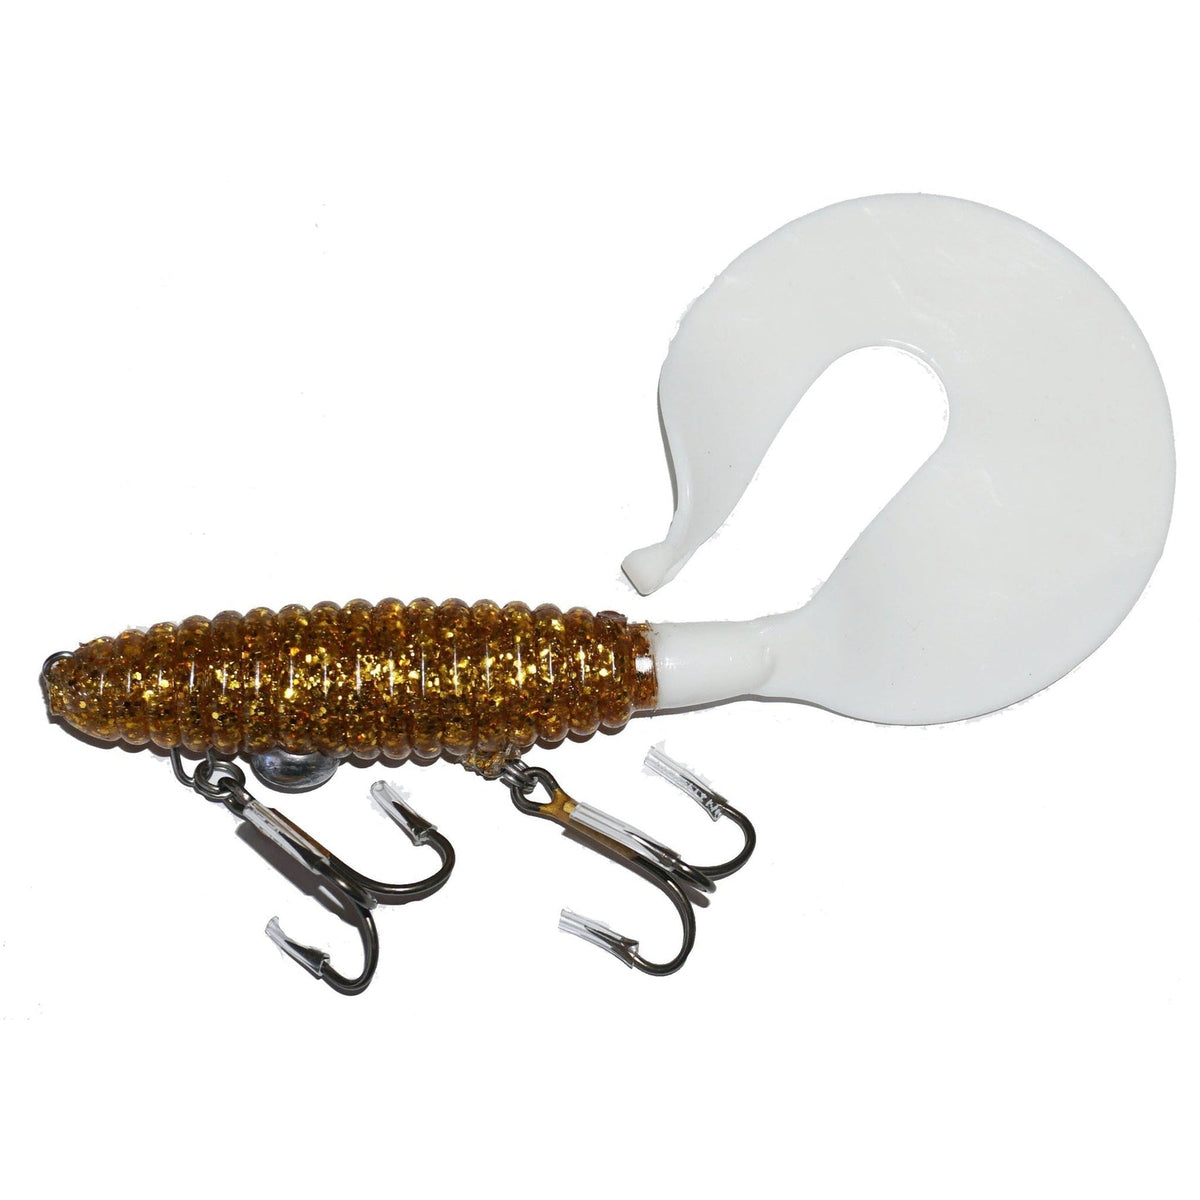 View of Rubber Whale Tail Plastics 8" Walleye / White Tail available at EZOKO Pike and Musky Shop